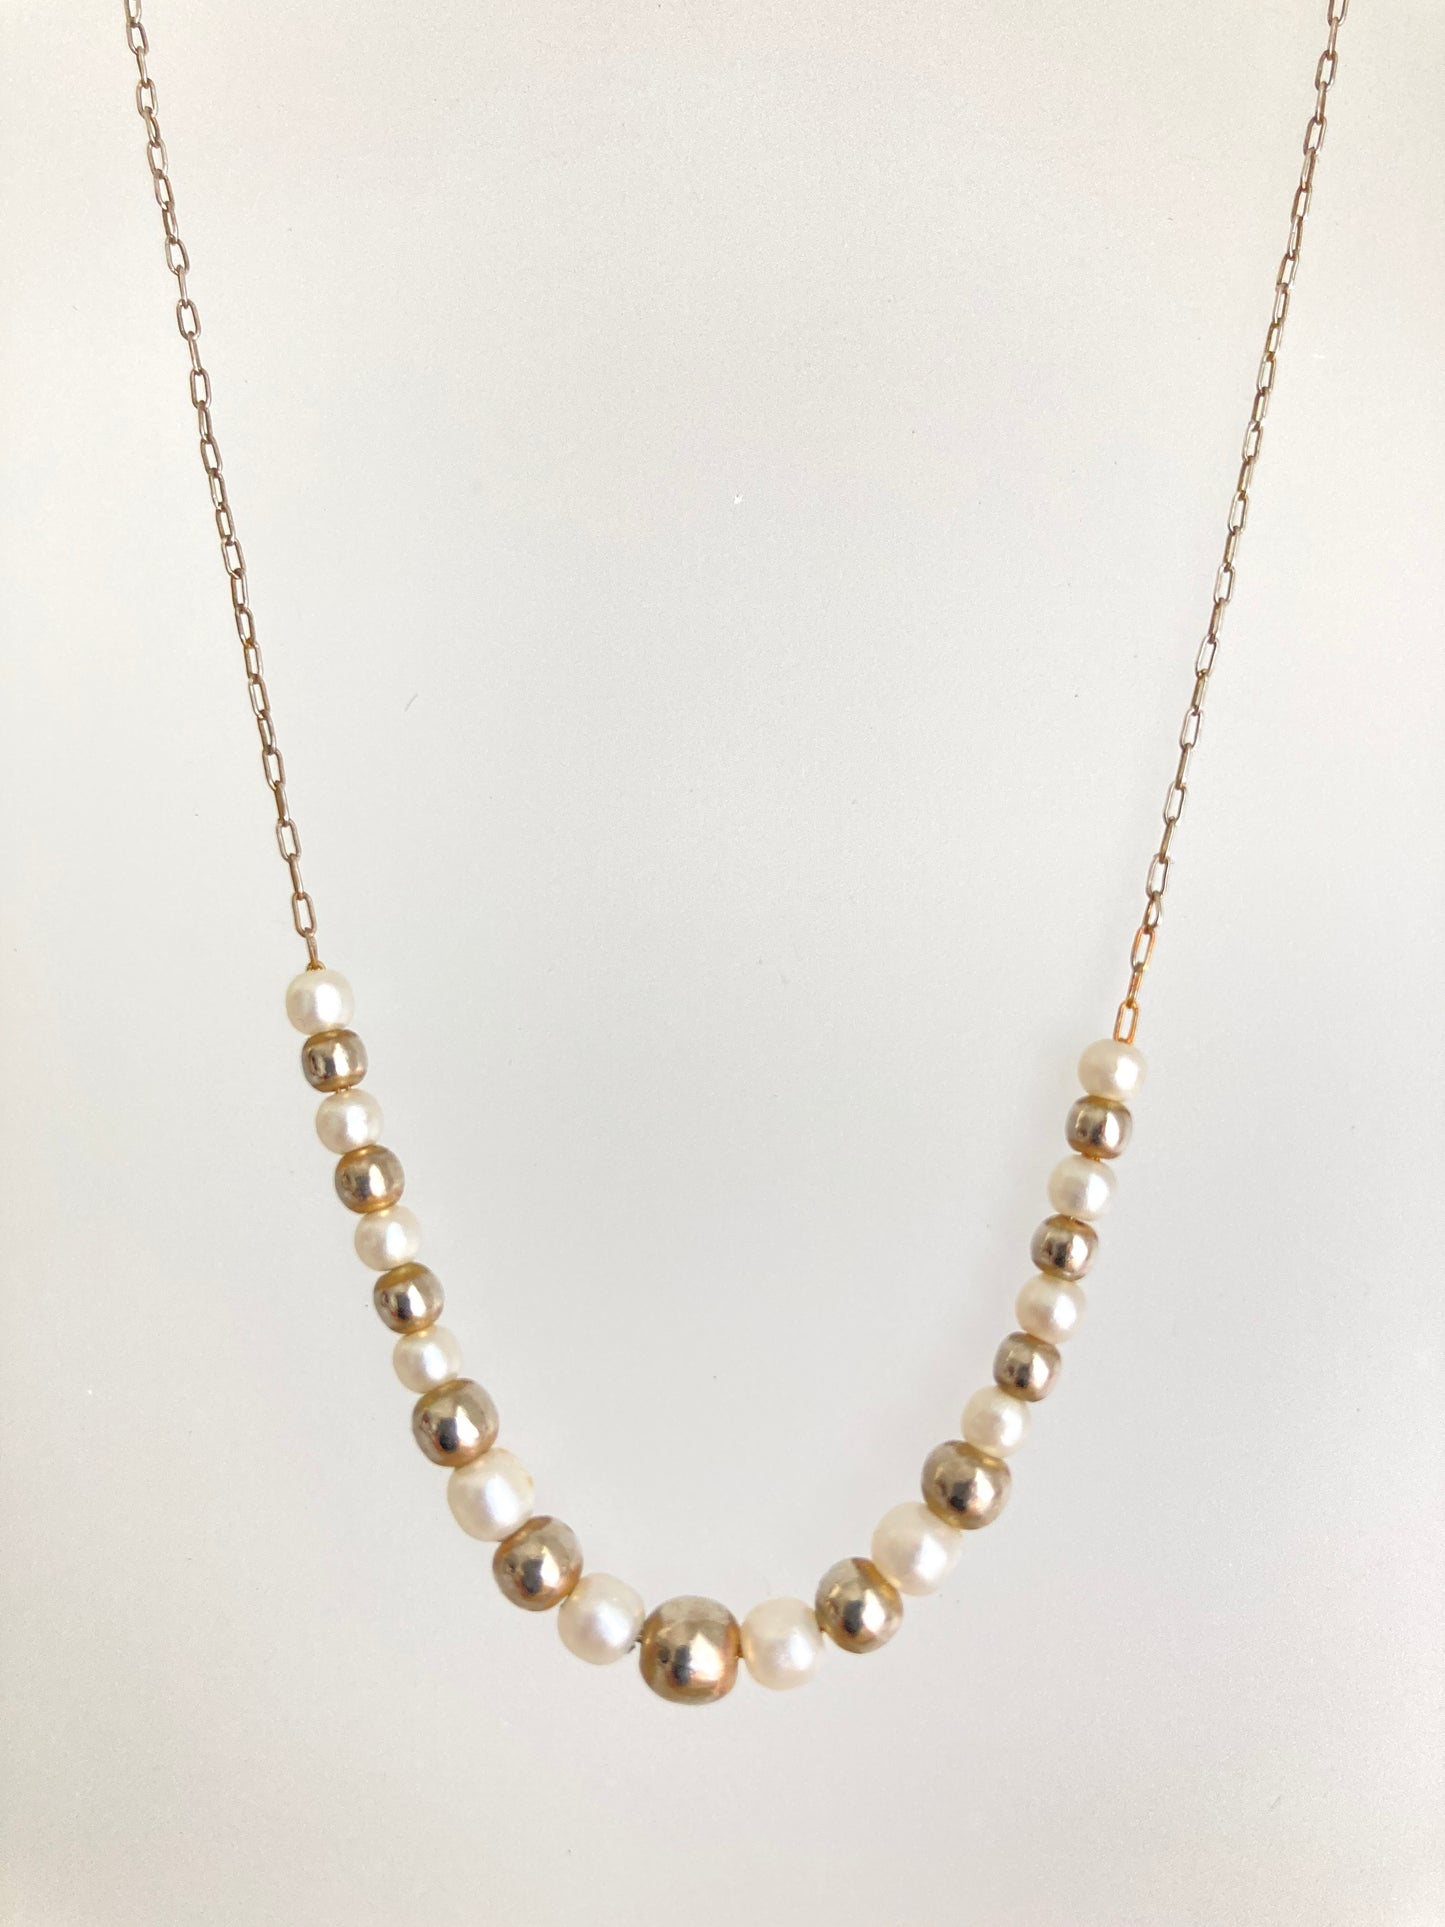 Graduated Floating Bead Choker Length Necklace Pearls and Silver